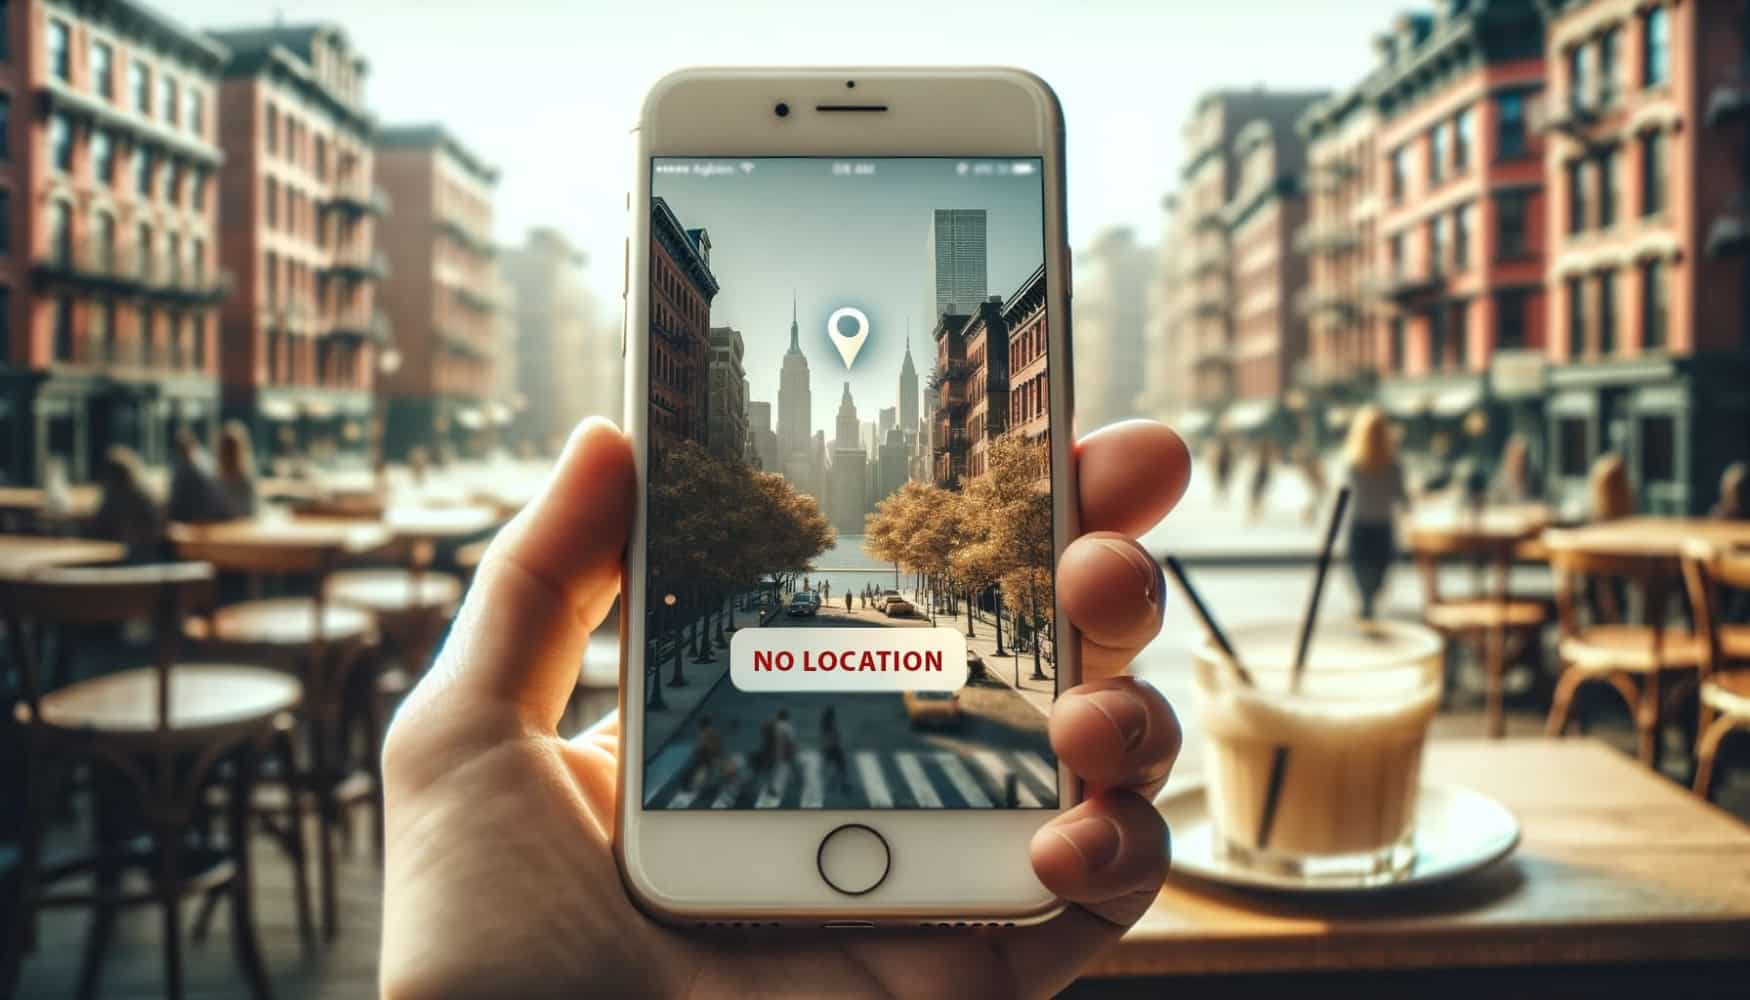 Against the background of the city, houses and cafe tables, a man's hand is holding an iPhone on which is shown a street with houses there is a geolocation mark and the inscription No location